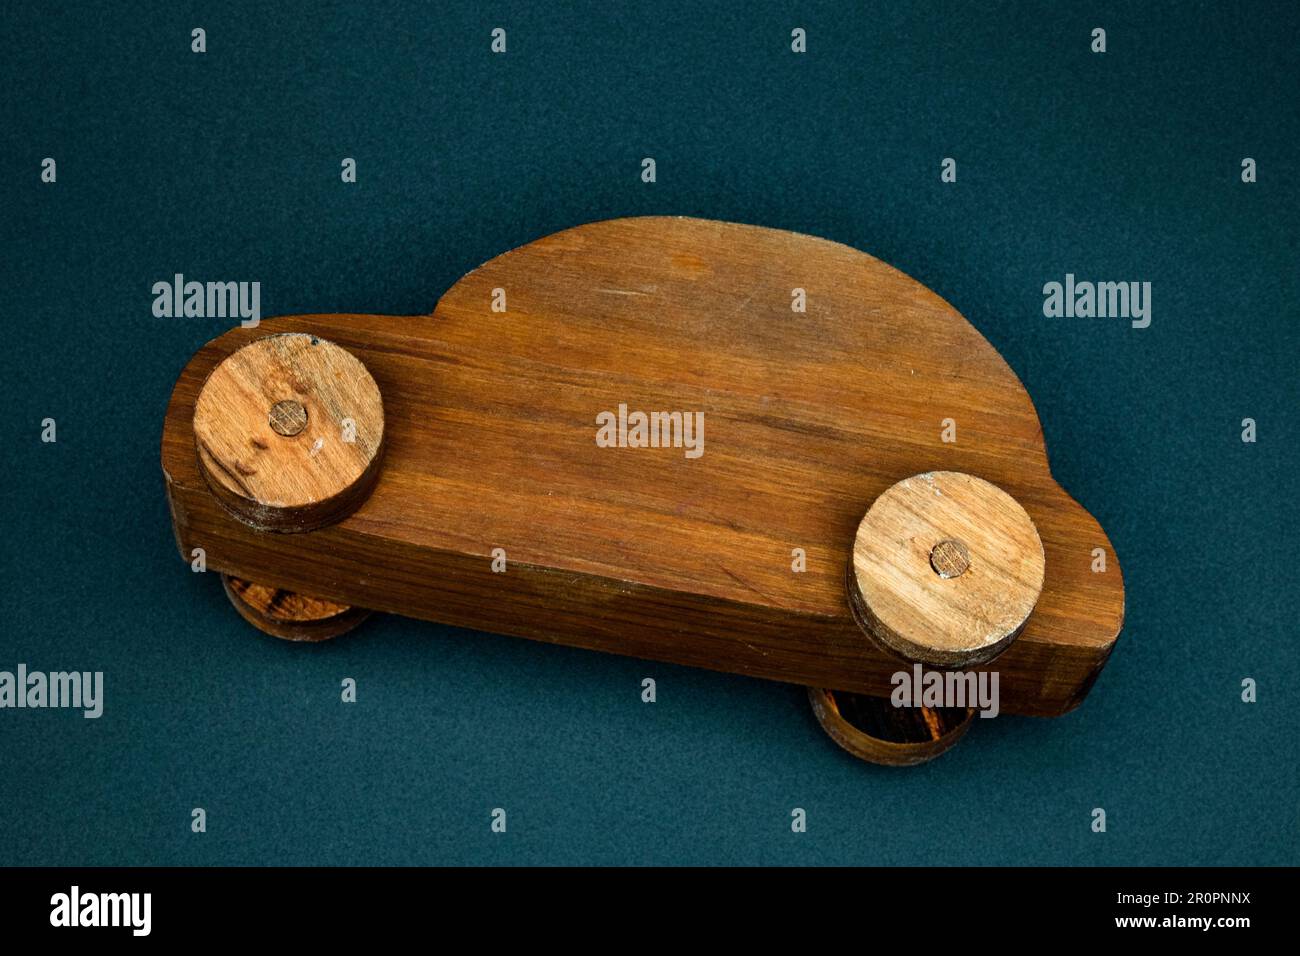 wooden toy car made from cherry wood, isolated on a black background, crashed on its side, top view Stock Photo